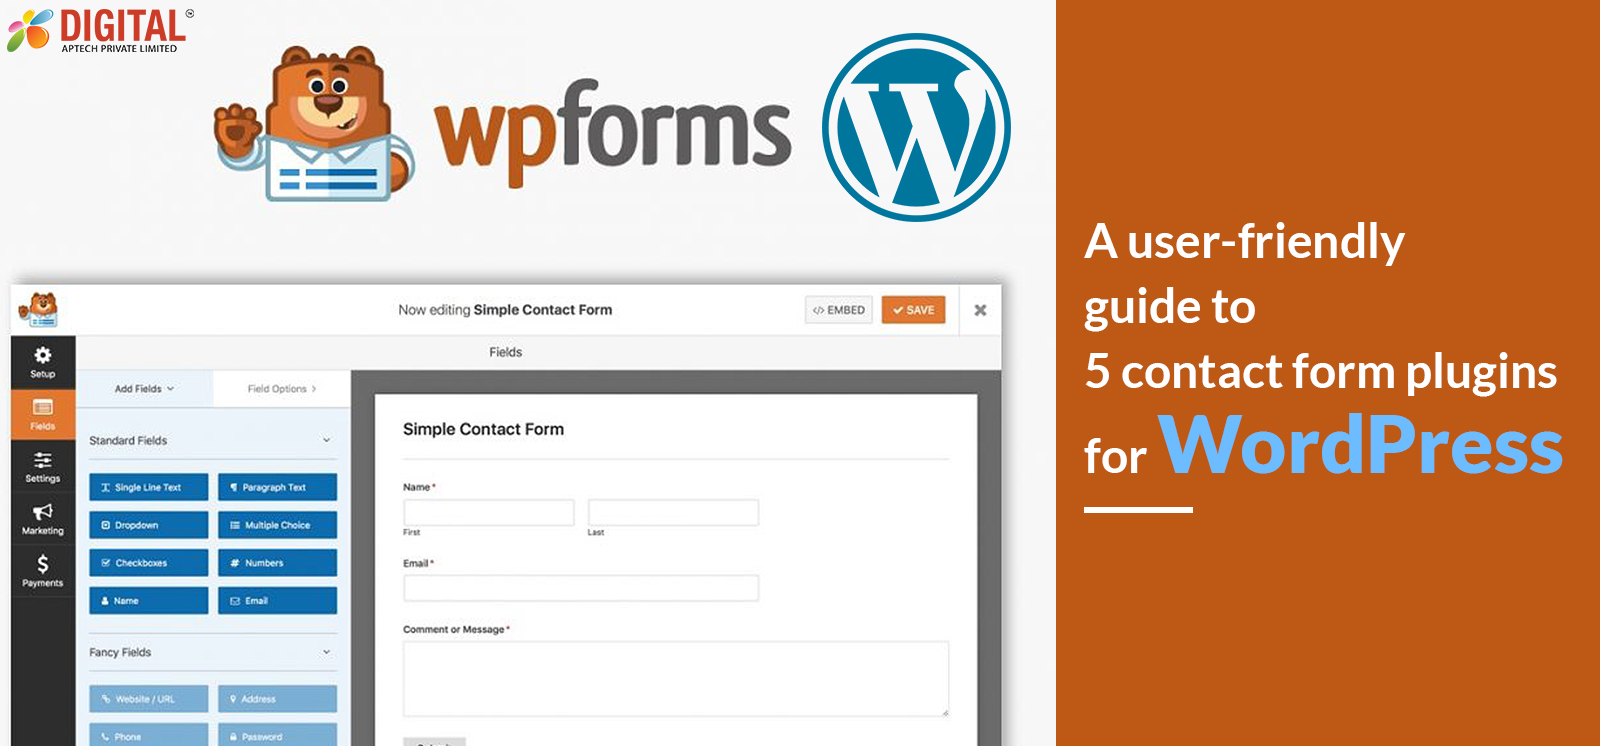 Users guide to contact form plugins for WordPress